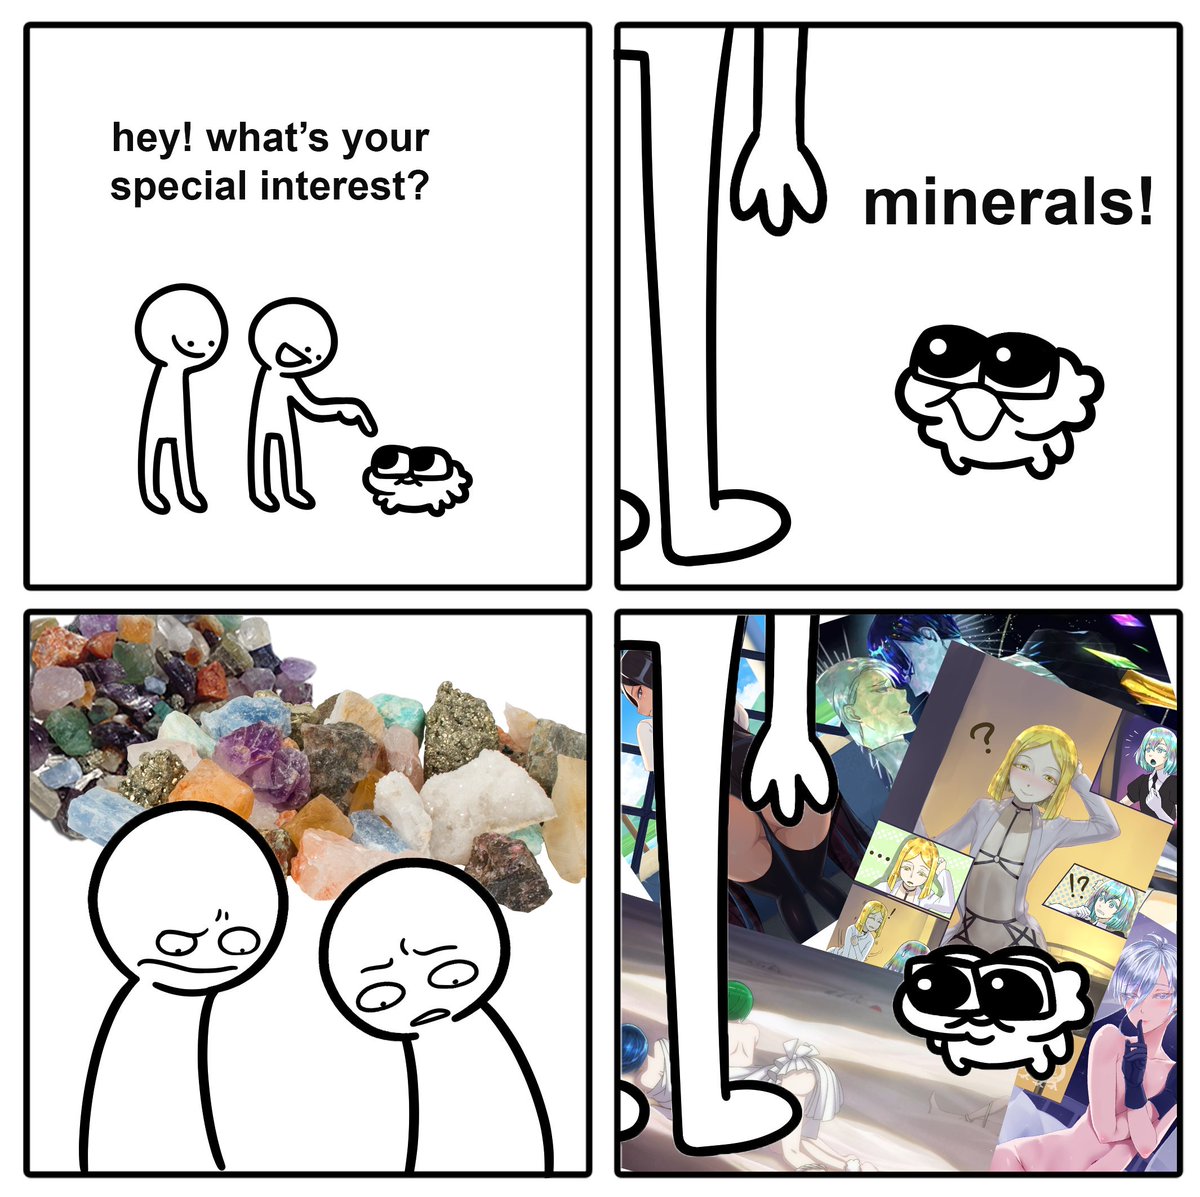 follow me for more minerals